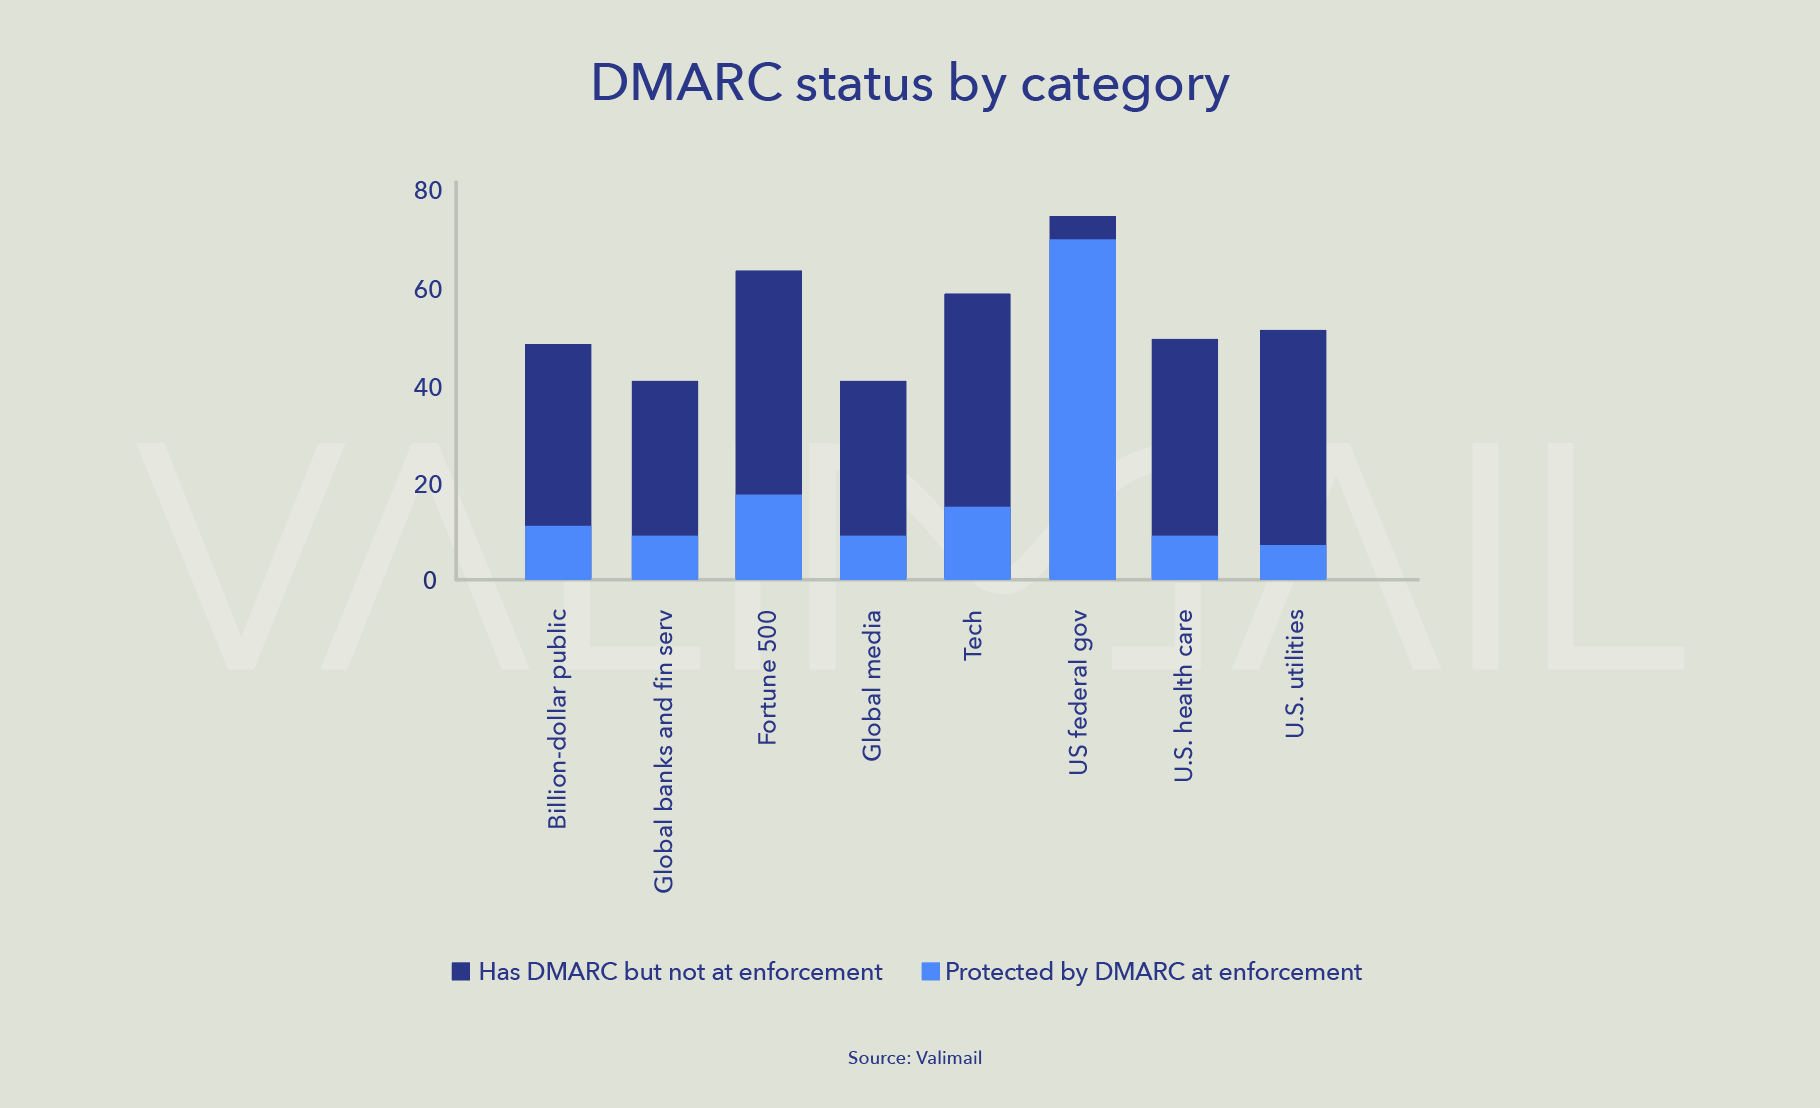 Column chart showing overall DMARC status by industry category